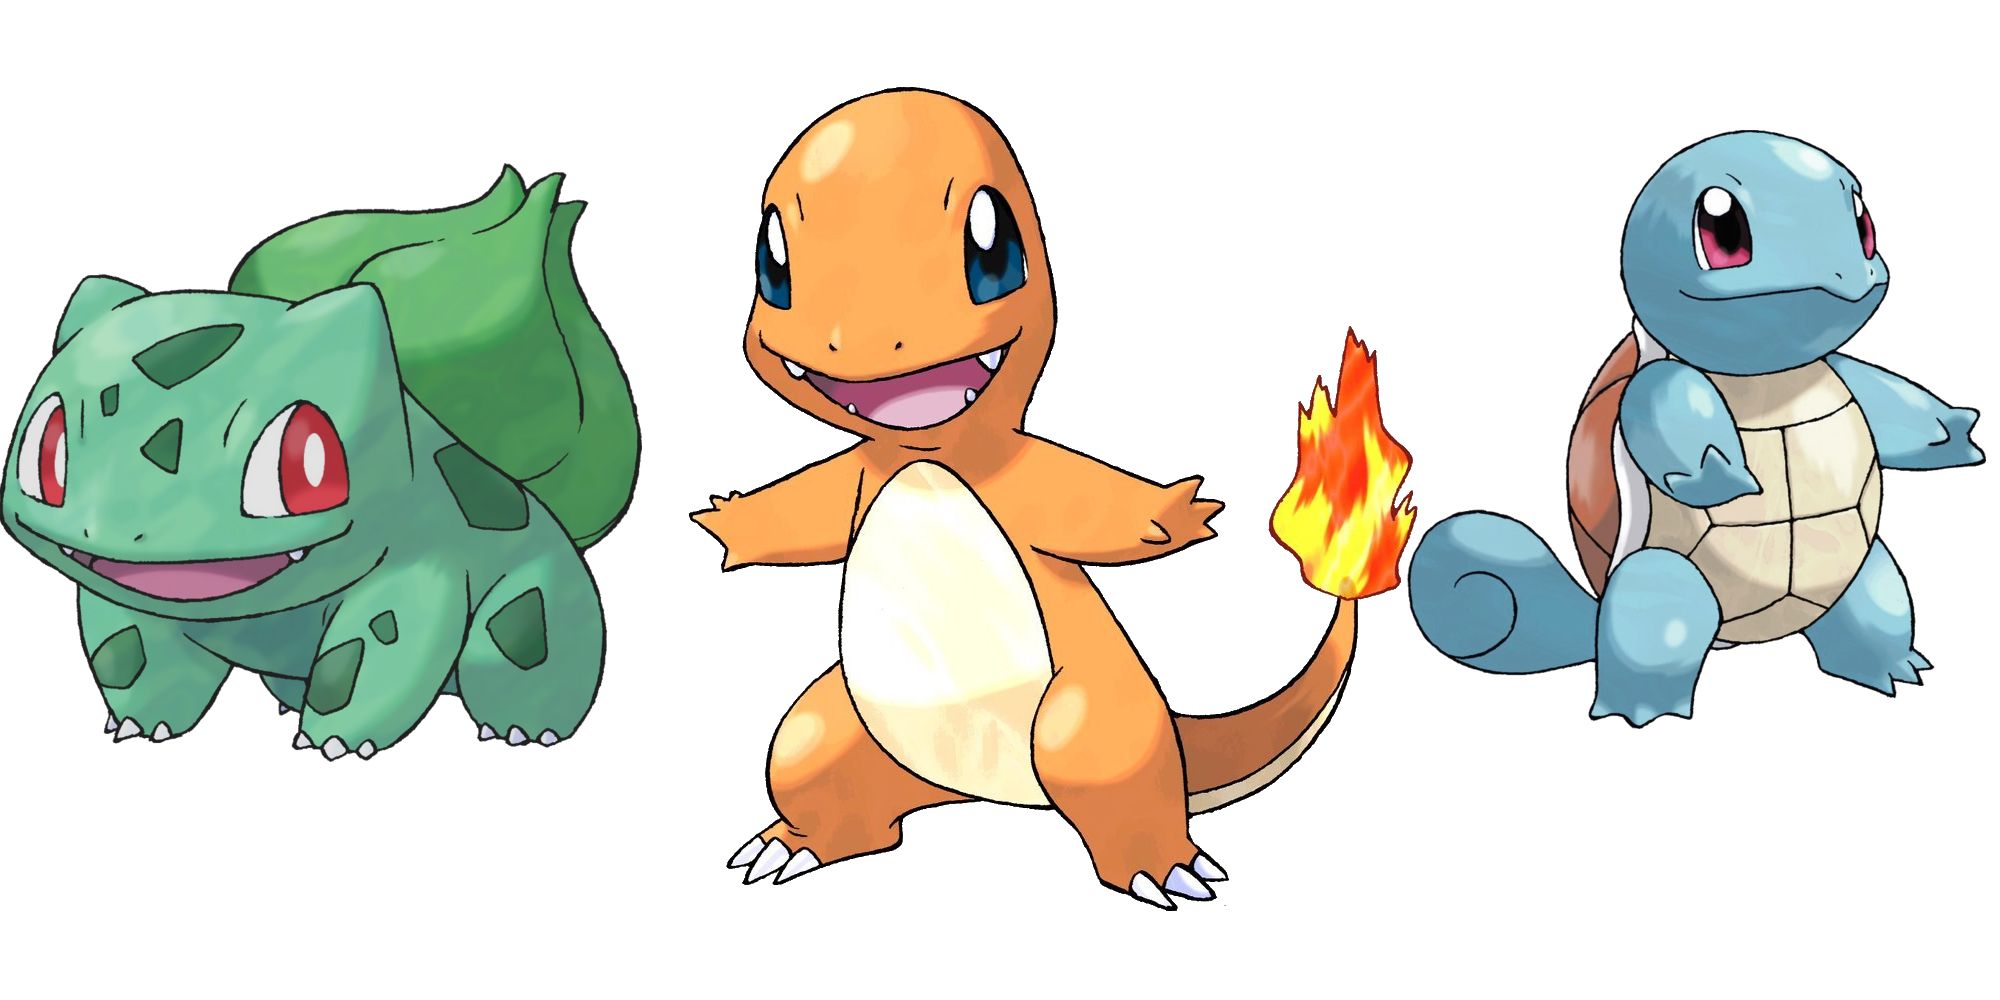 The Kanto Pokemon Starters, Bulbasaur, Charmander, and Squirtle, against a white background